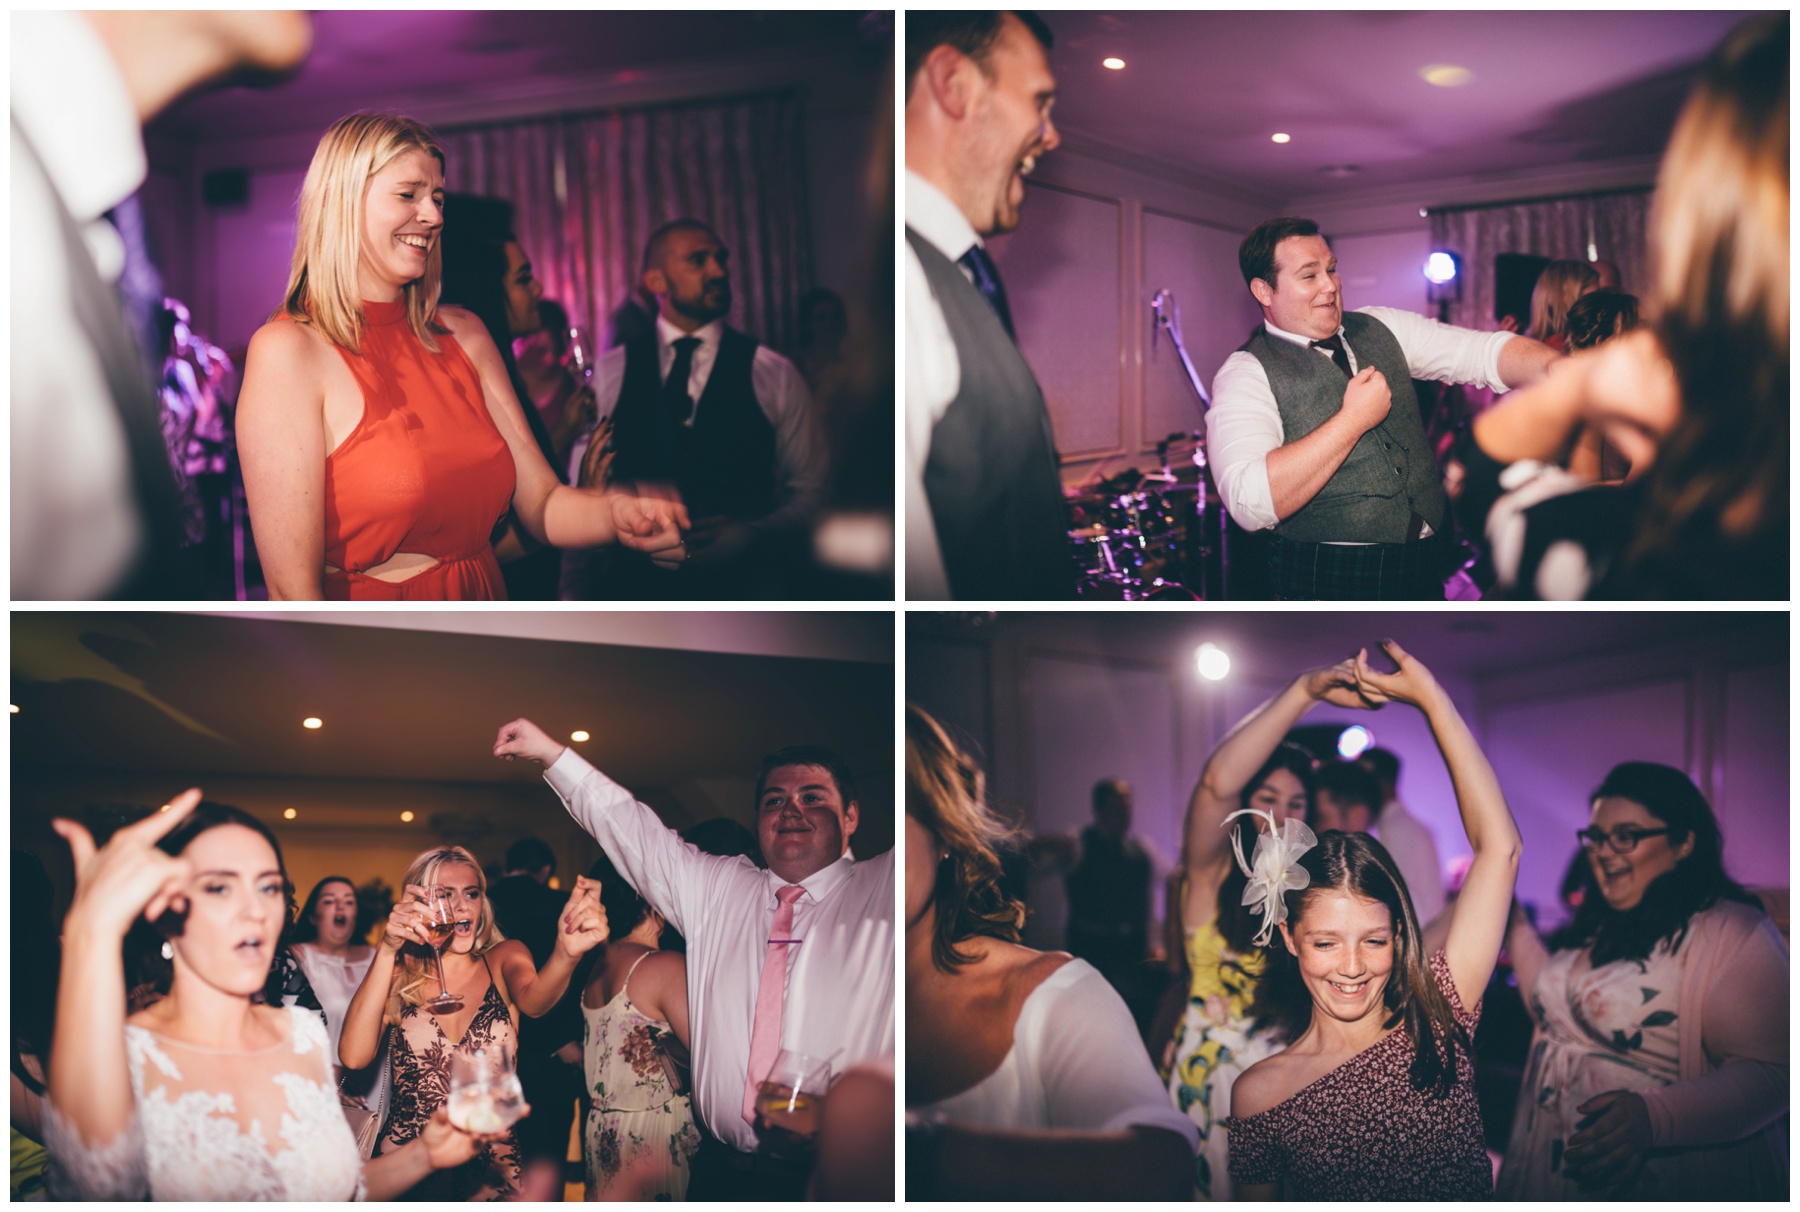 Wedding guests on the dance floor at Tilstone House in Tarporley, Cheshire.